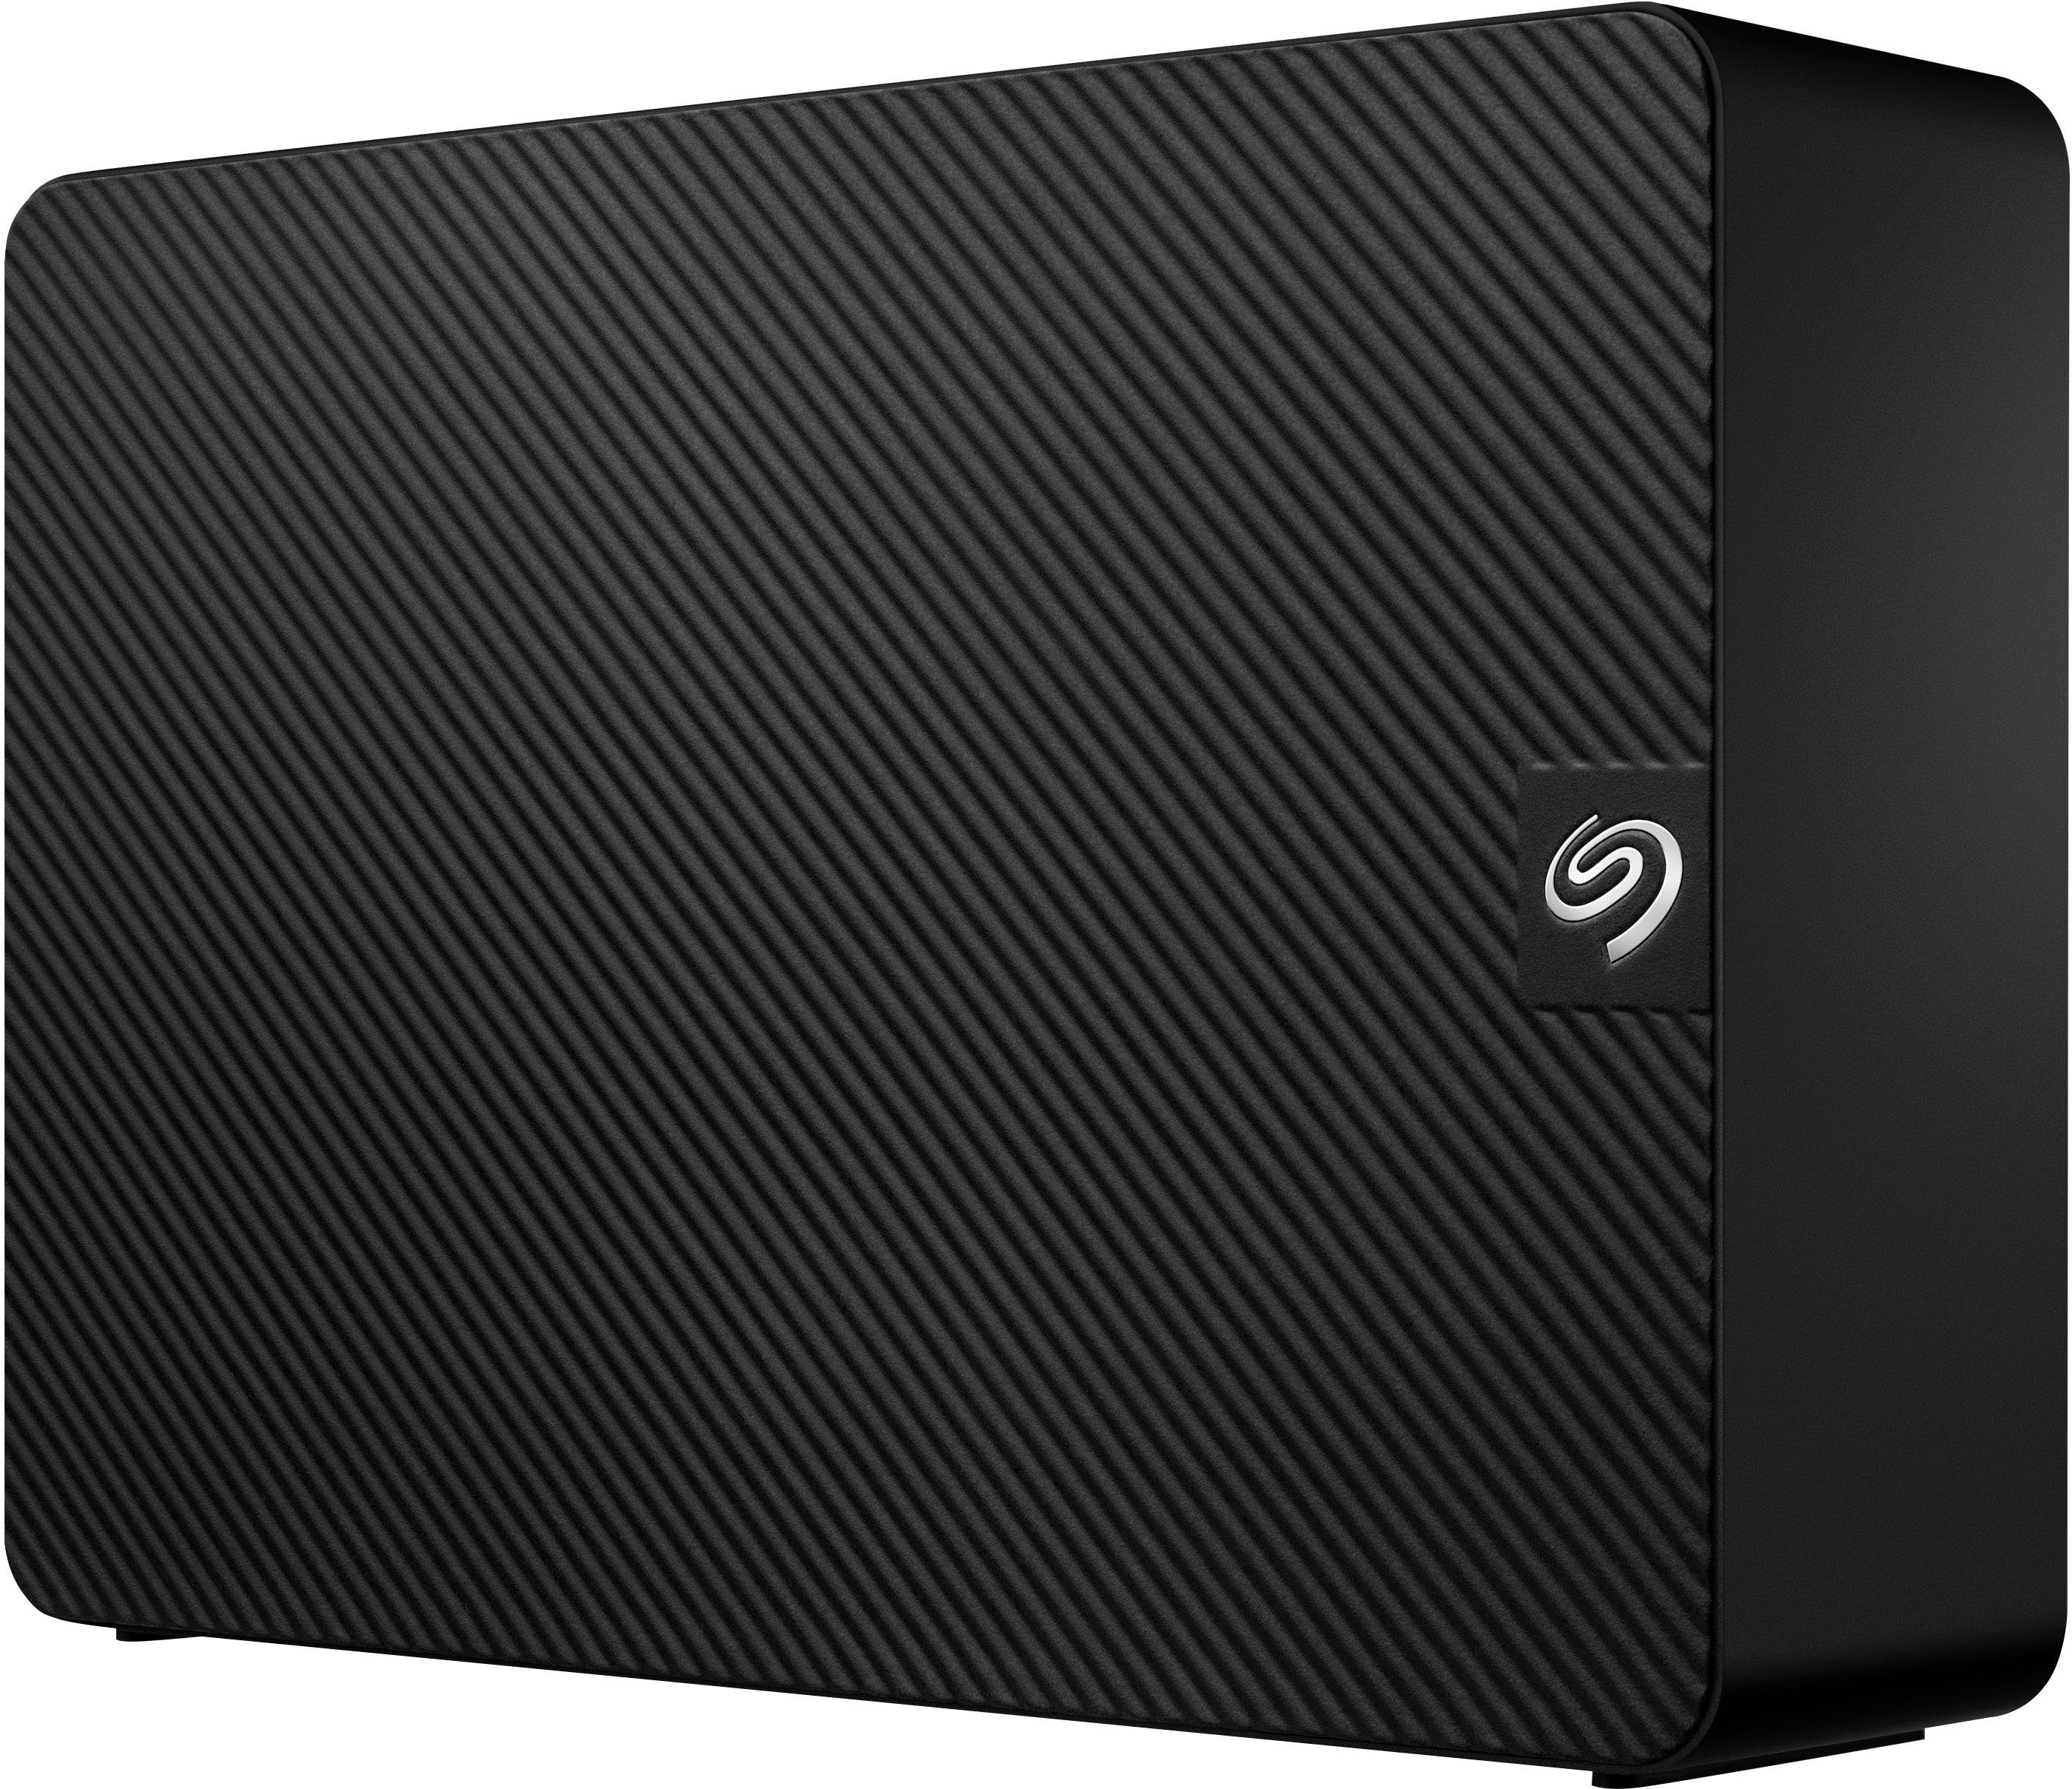 Angle View: Seagate - Expansion 16TB External USB 3.0  Portable Hard Drive with Rescue Data Recovery Services - Black